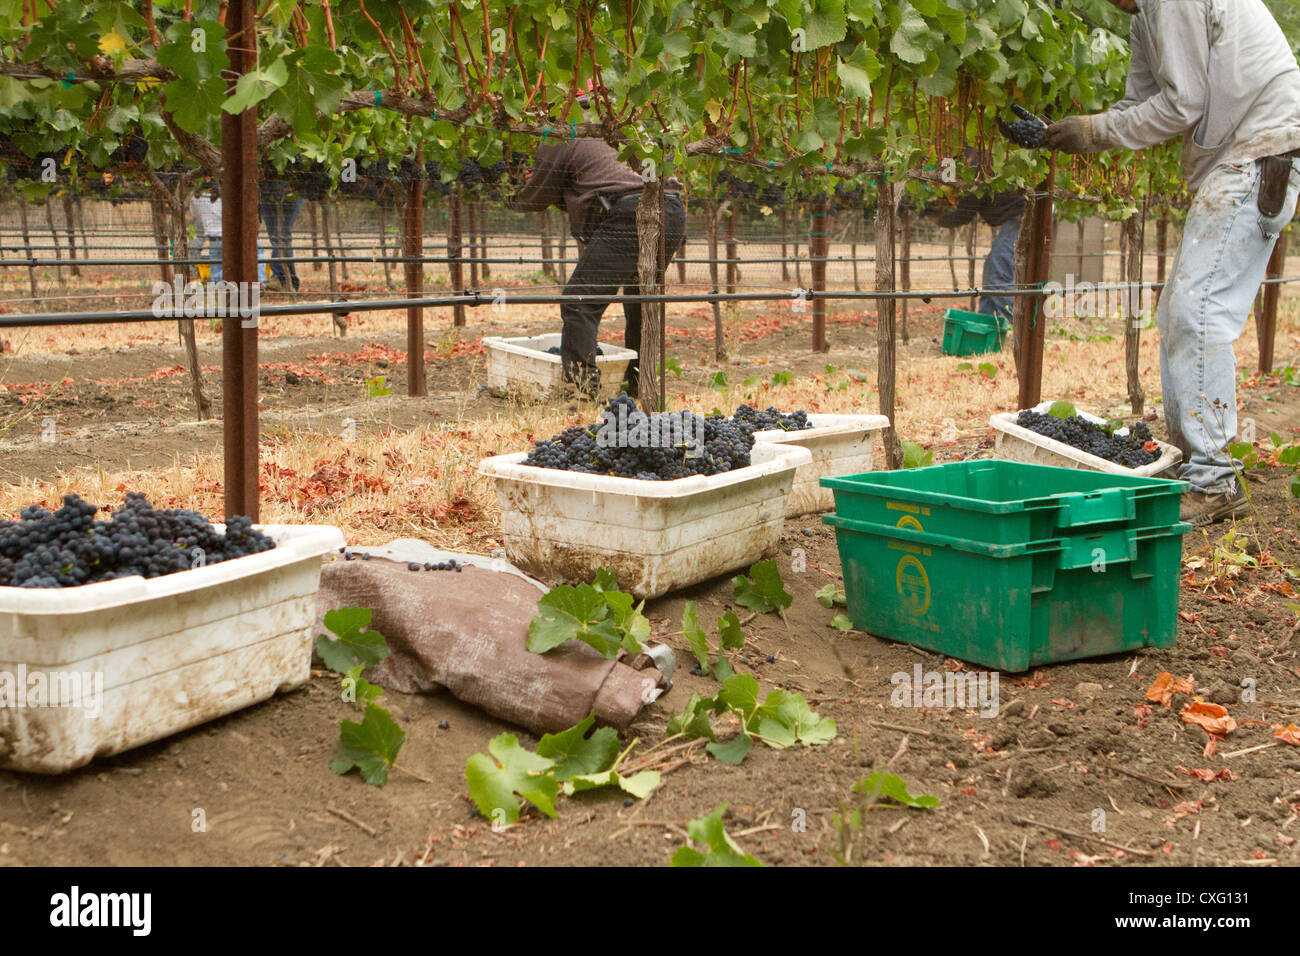 Several full bins of Pinot Noir grapes on the ground while workers harvest the wine grapes. Stock Photo